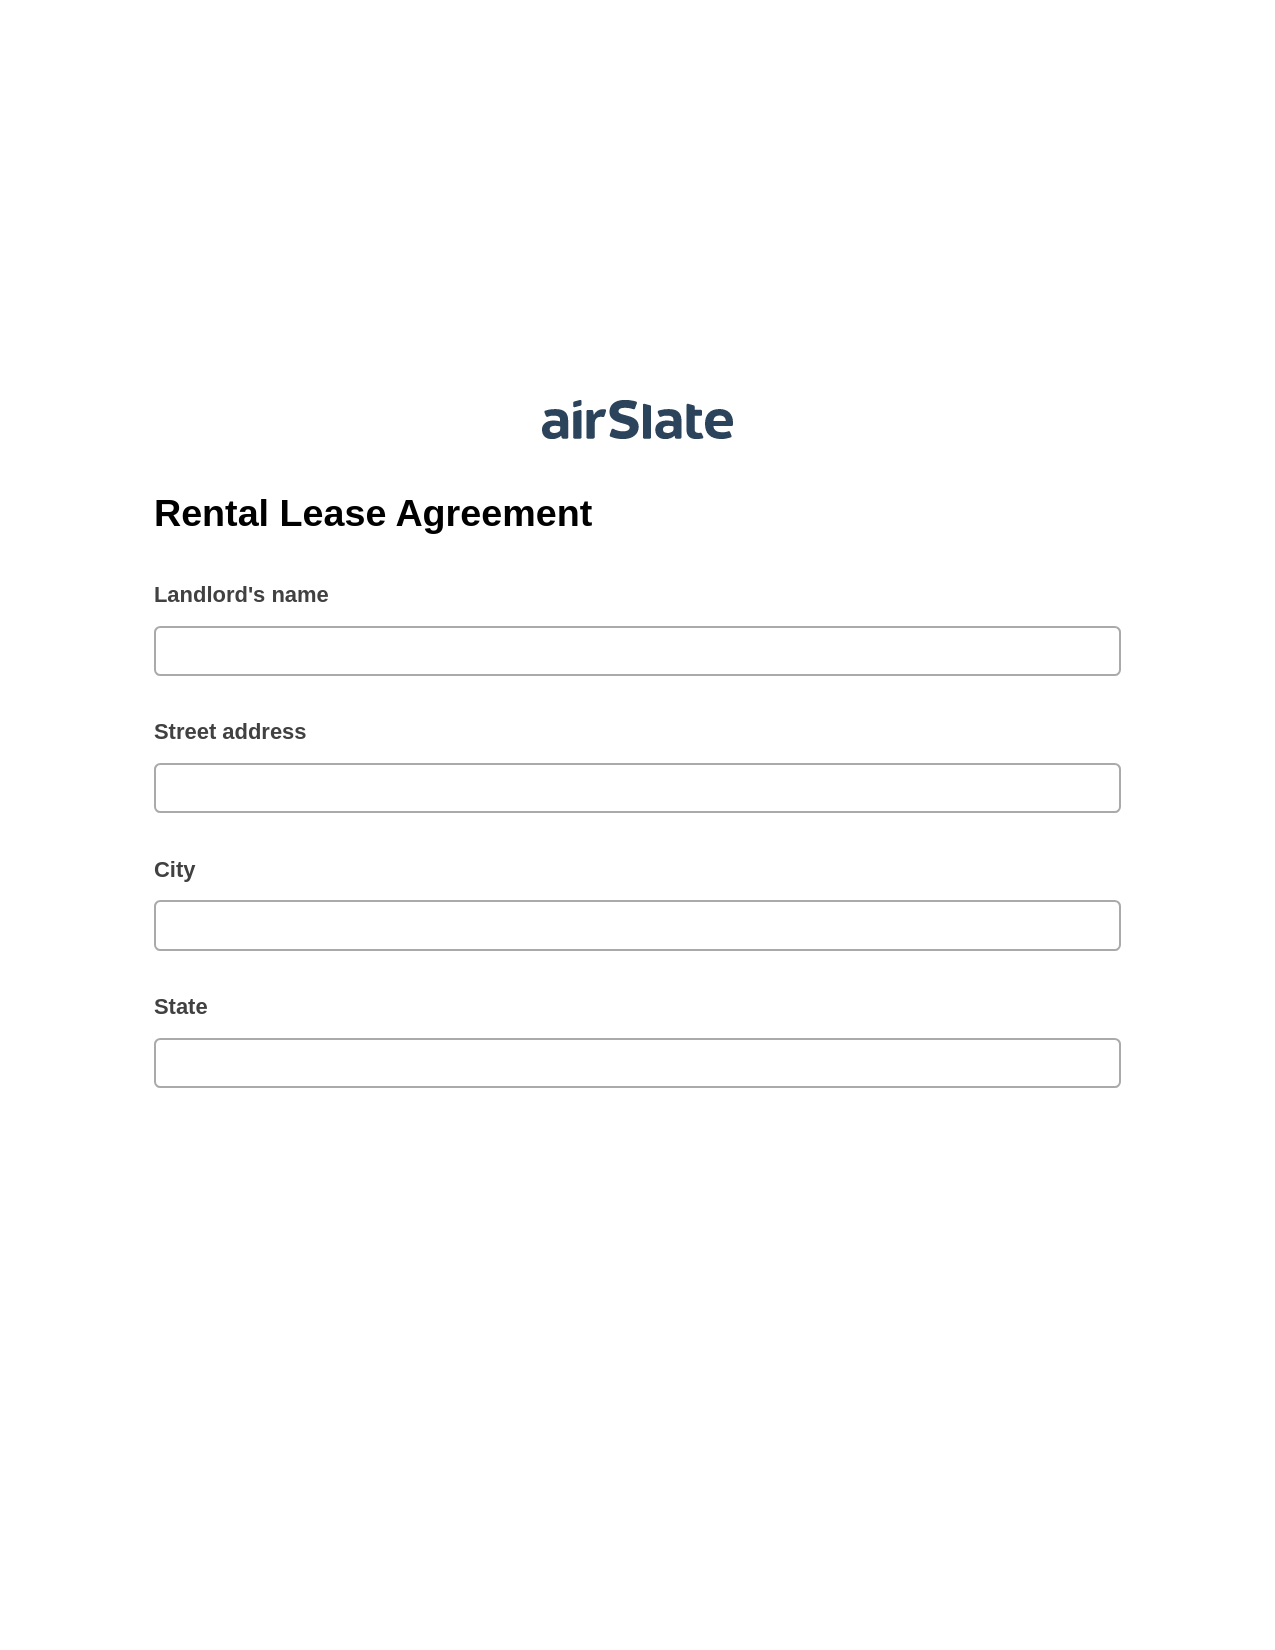 Multirole Rental Lease Agreement Pre-fill from Google Sheet Dropdown Options Bot, Create Slate every Google Sheet Update Bot, Export to NetSuite Record Bot